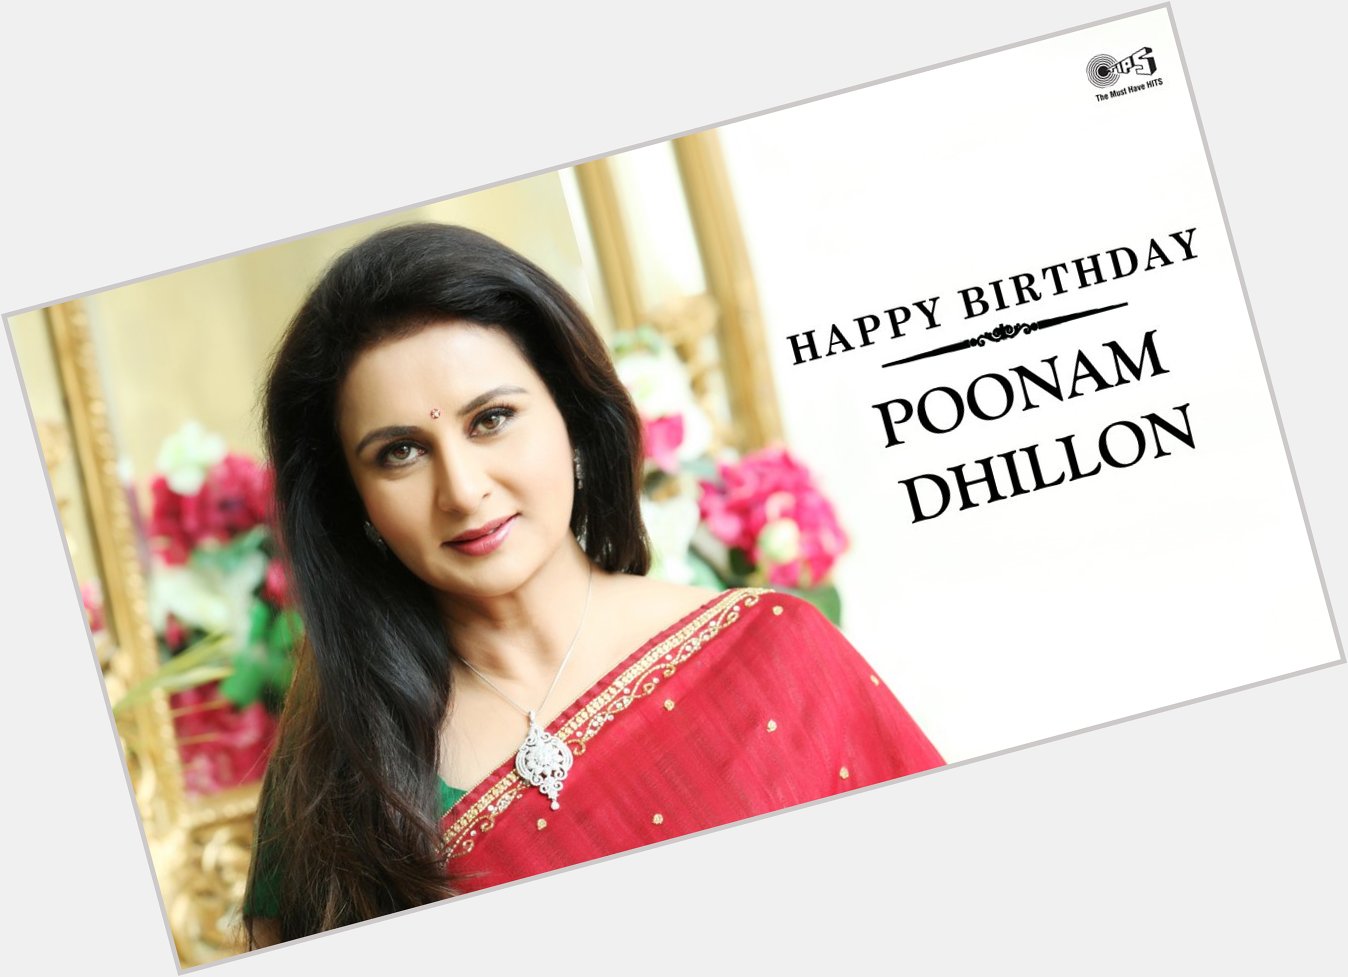 Wishing the veteran actress Poonam Dhillon a very Happy and Cheerful Birthday. 